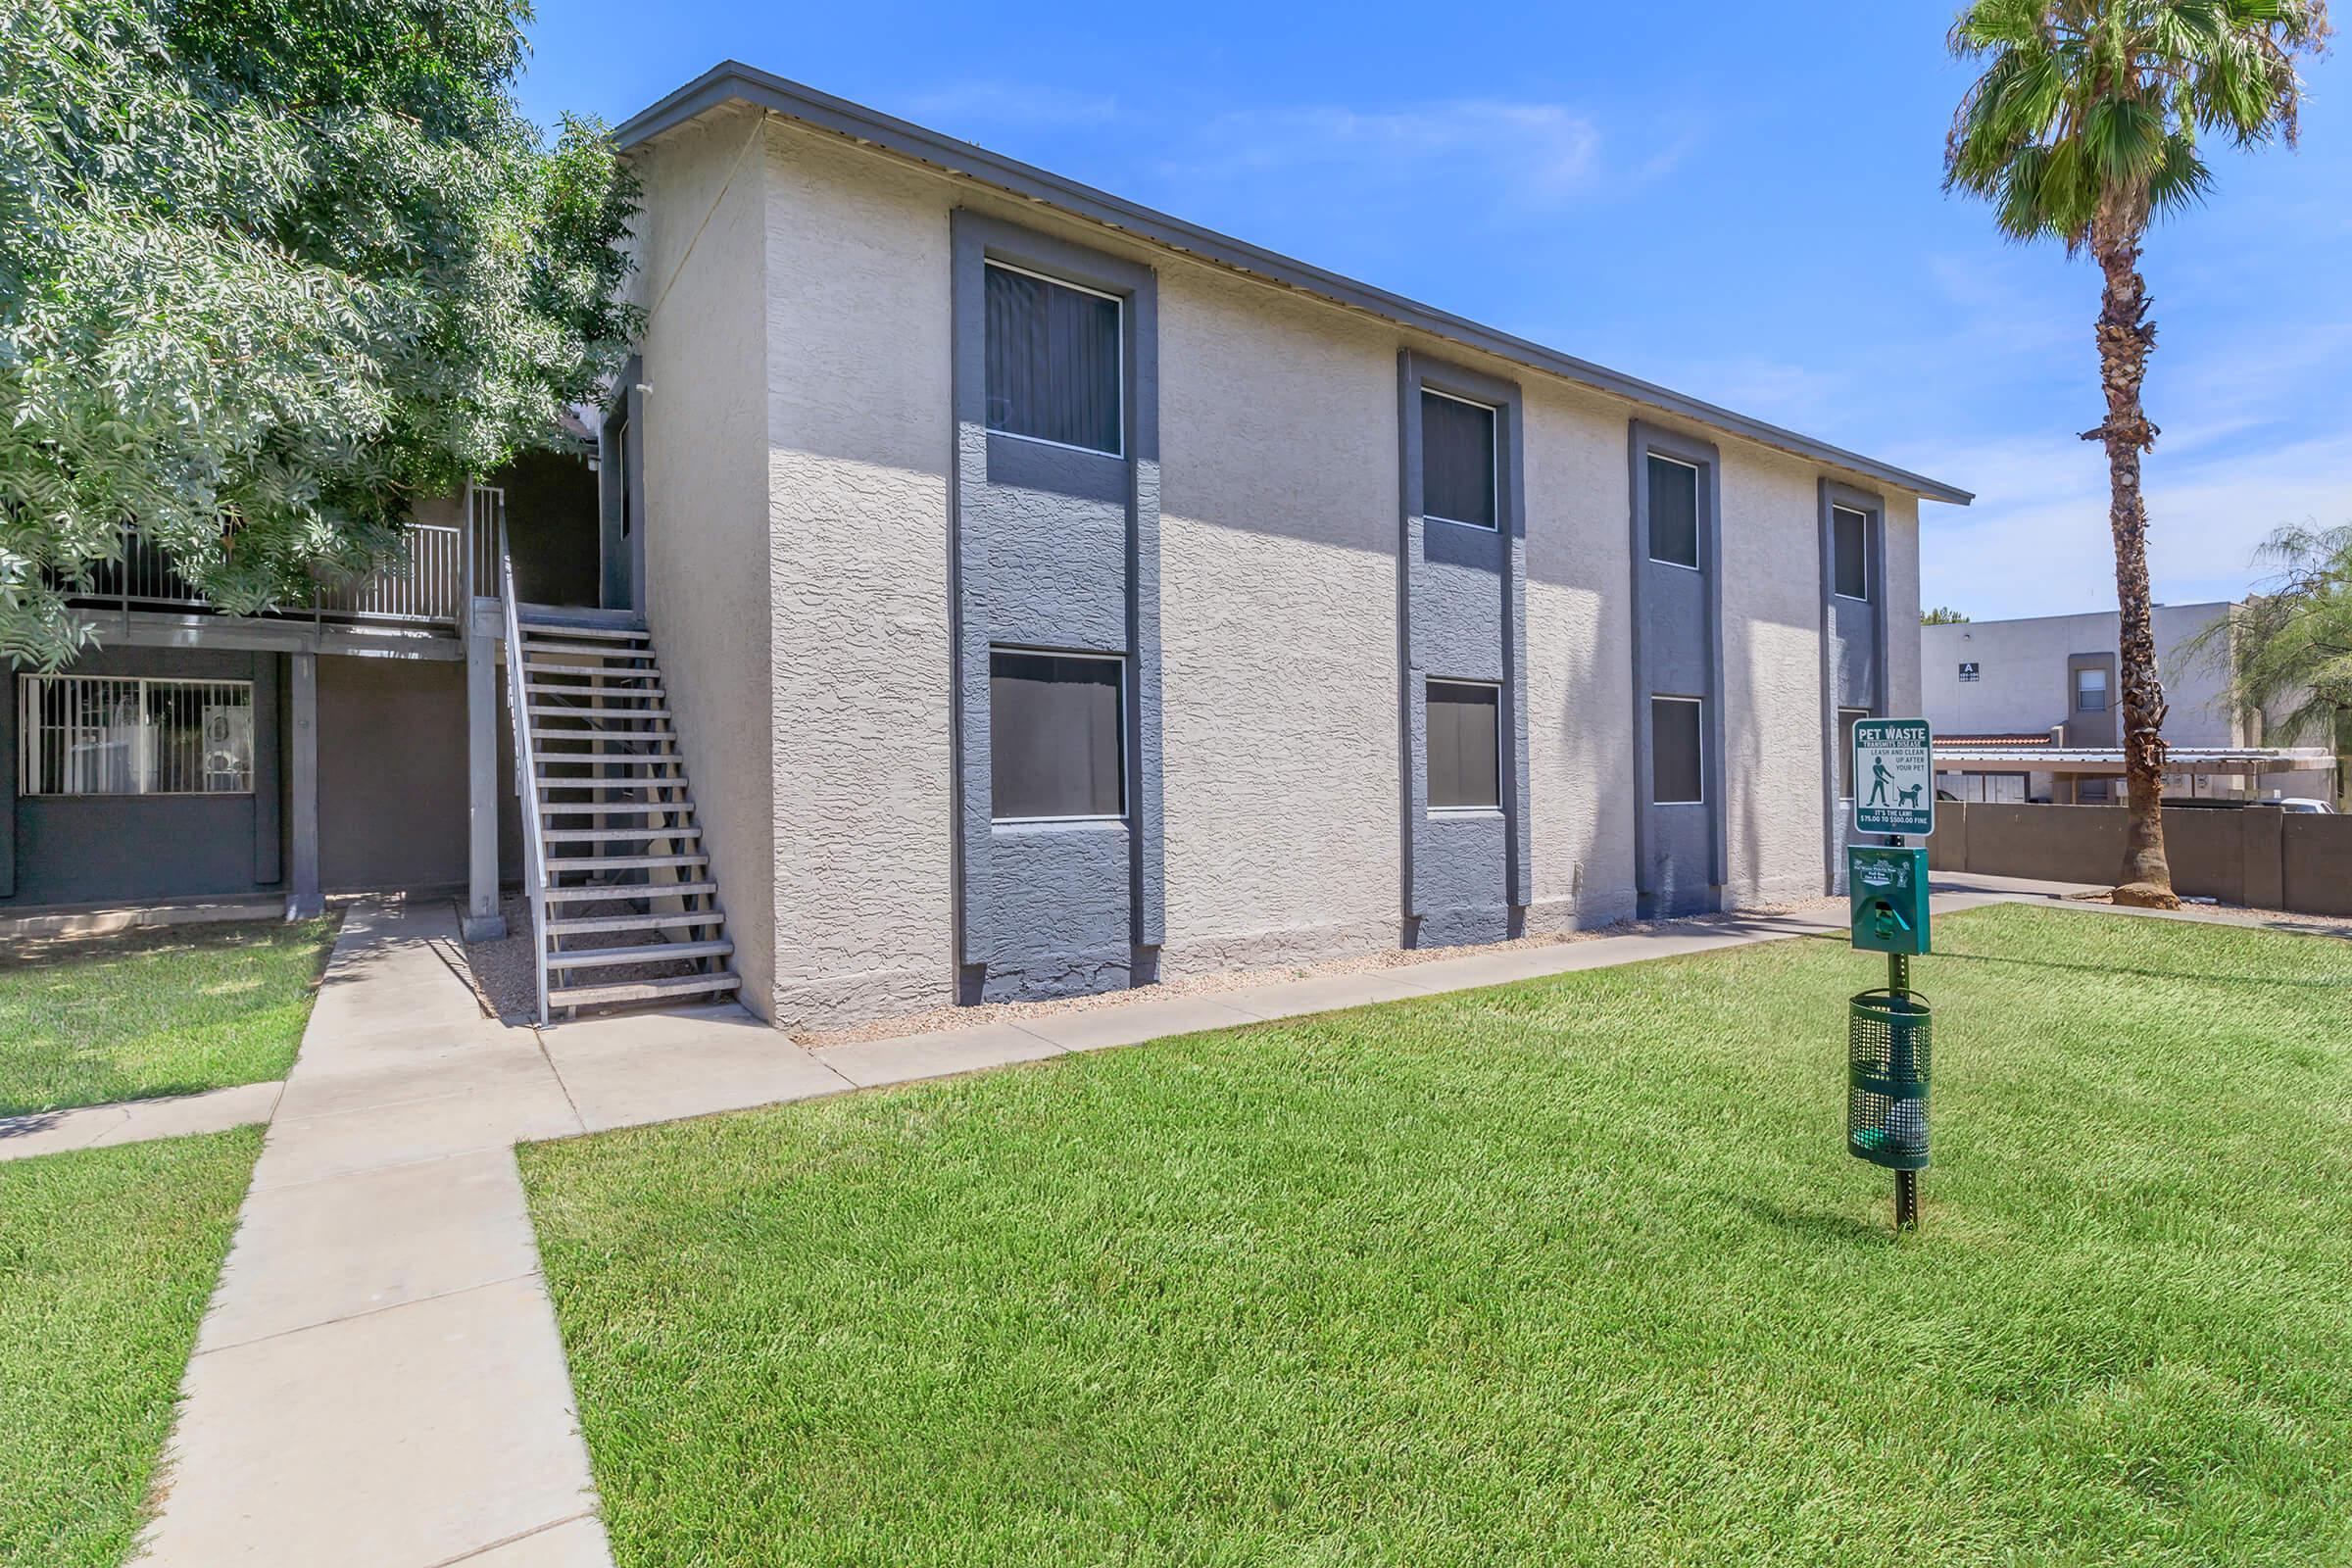 Two-story Phoenix apartments for rent with large grassy lot and dog clean up station in front